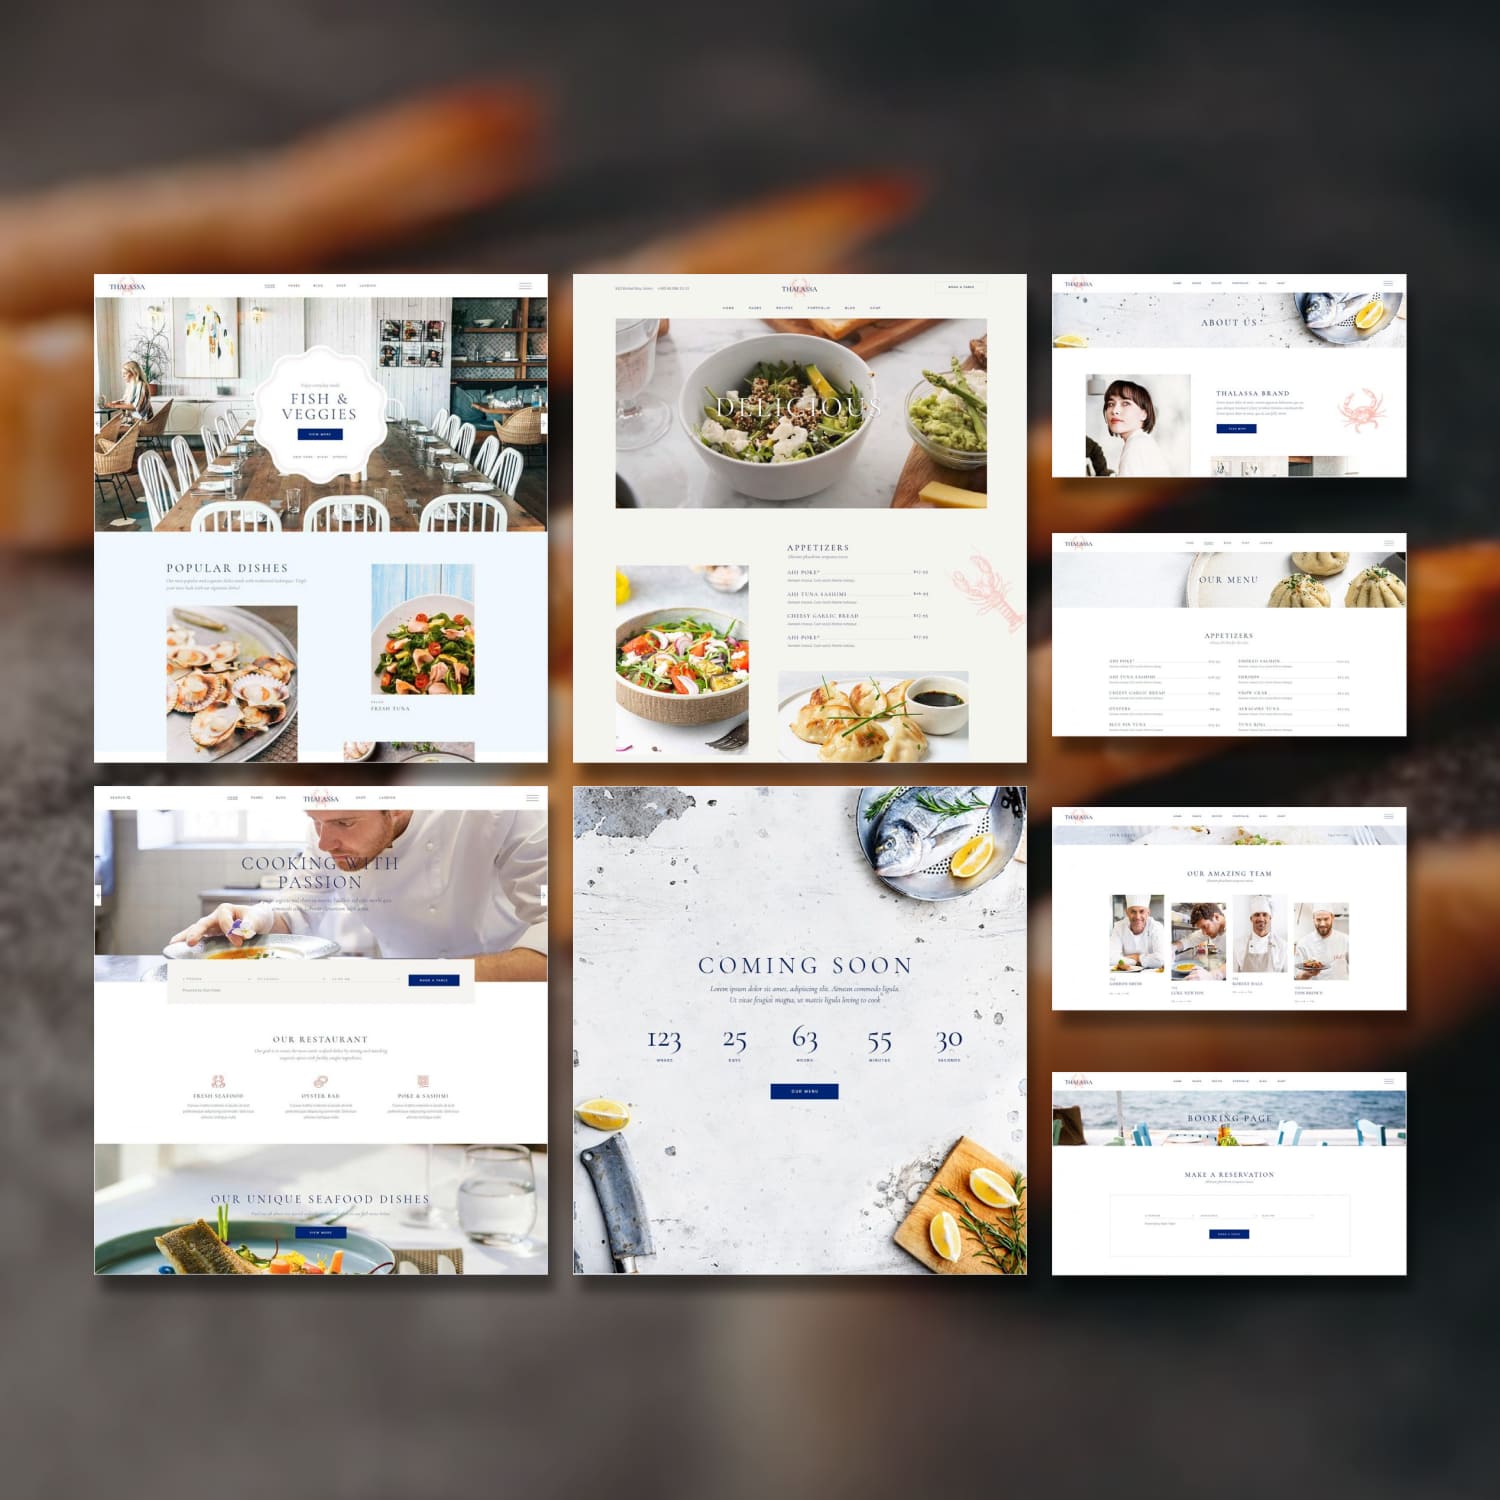 Thalassa - Seafood Restaurant Theme’s a fresh, contemporary theme we designed for seafood restaurant, fine dining restaurant, Asian food and sushi bar websites.